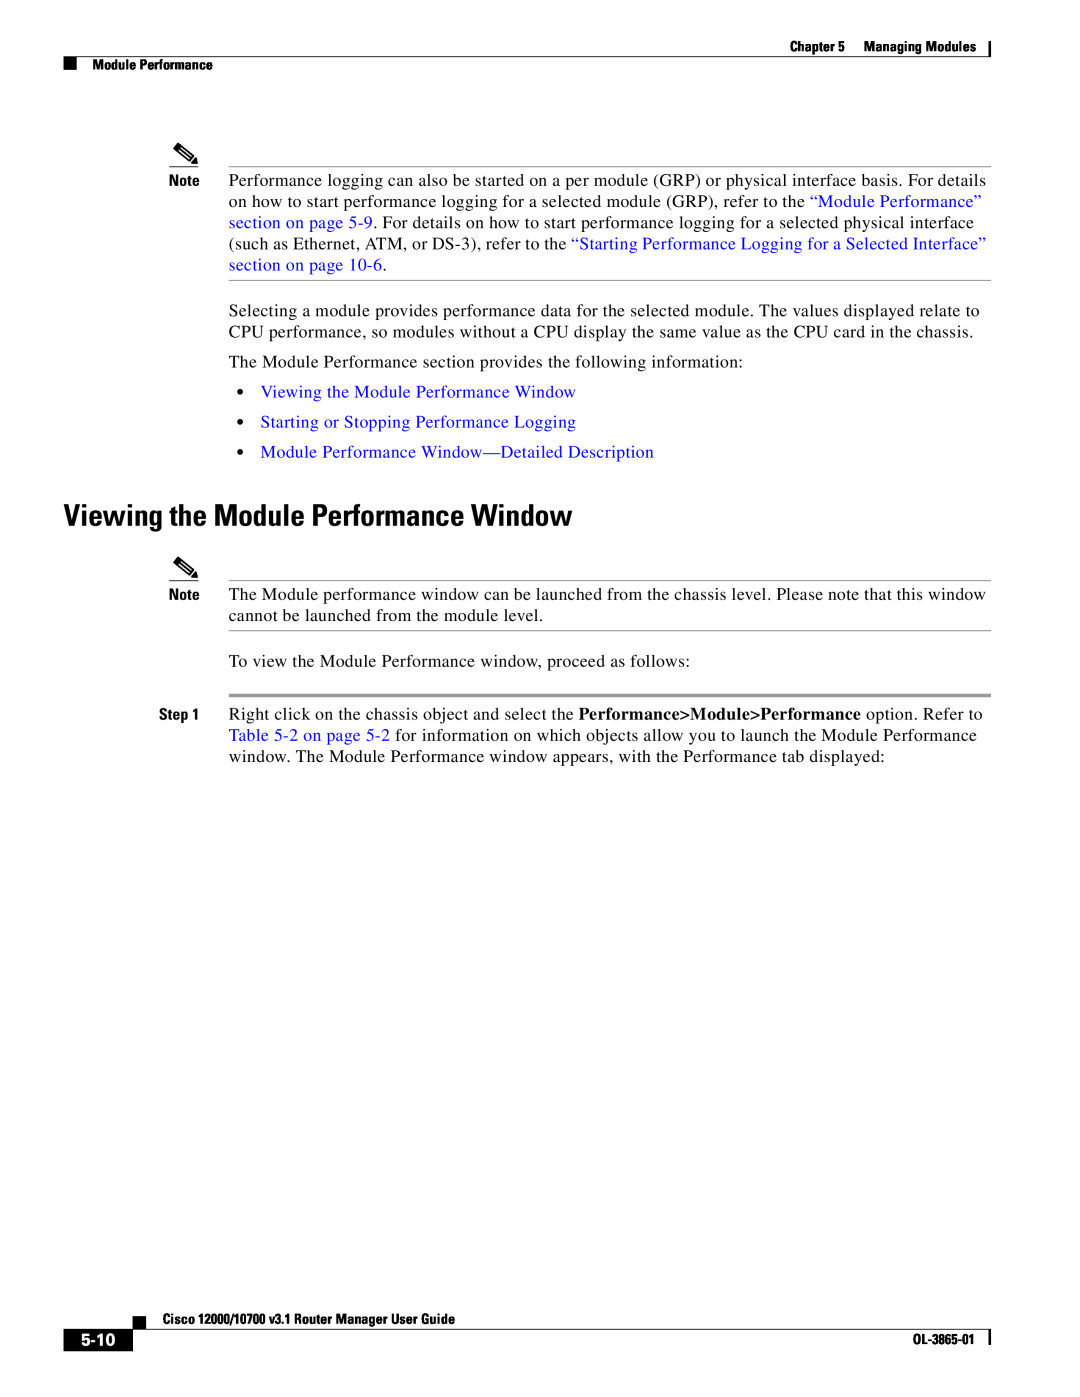 Cisco Systems 10700 manual Viewing the Module Performance Window, Starting or Stopping Performance Logging, 5-10 